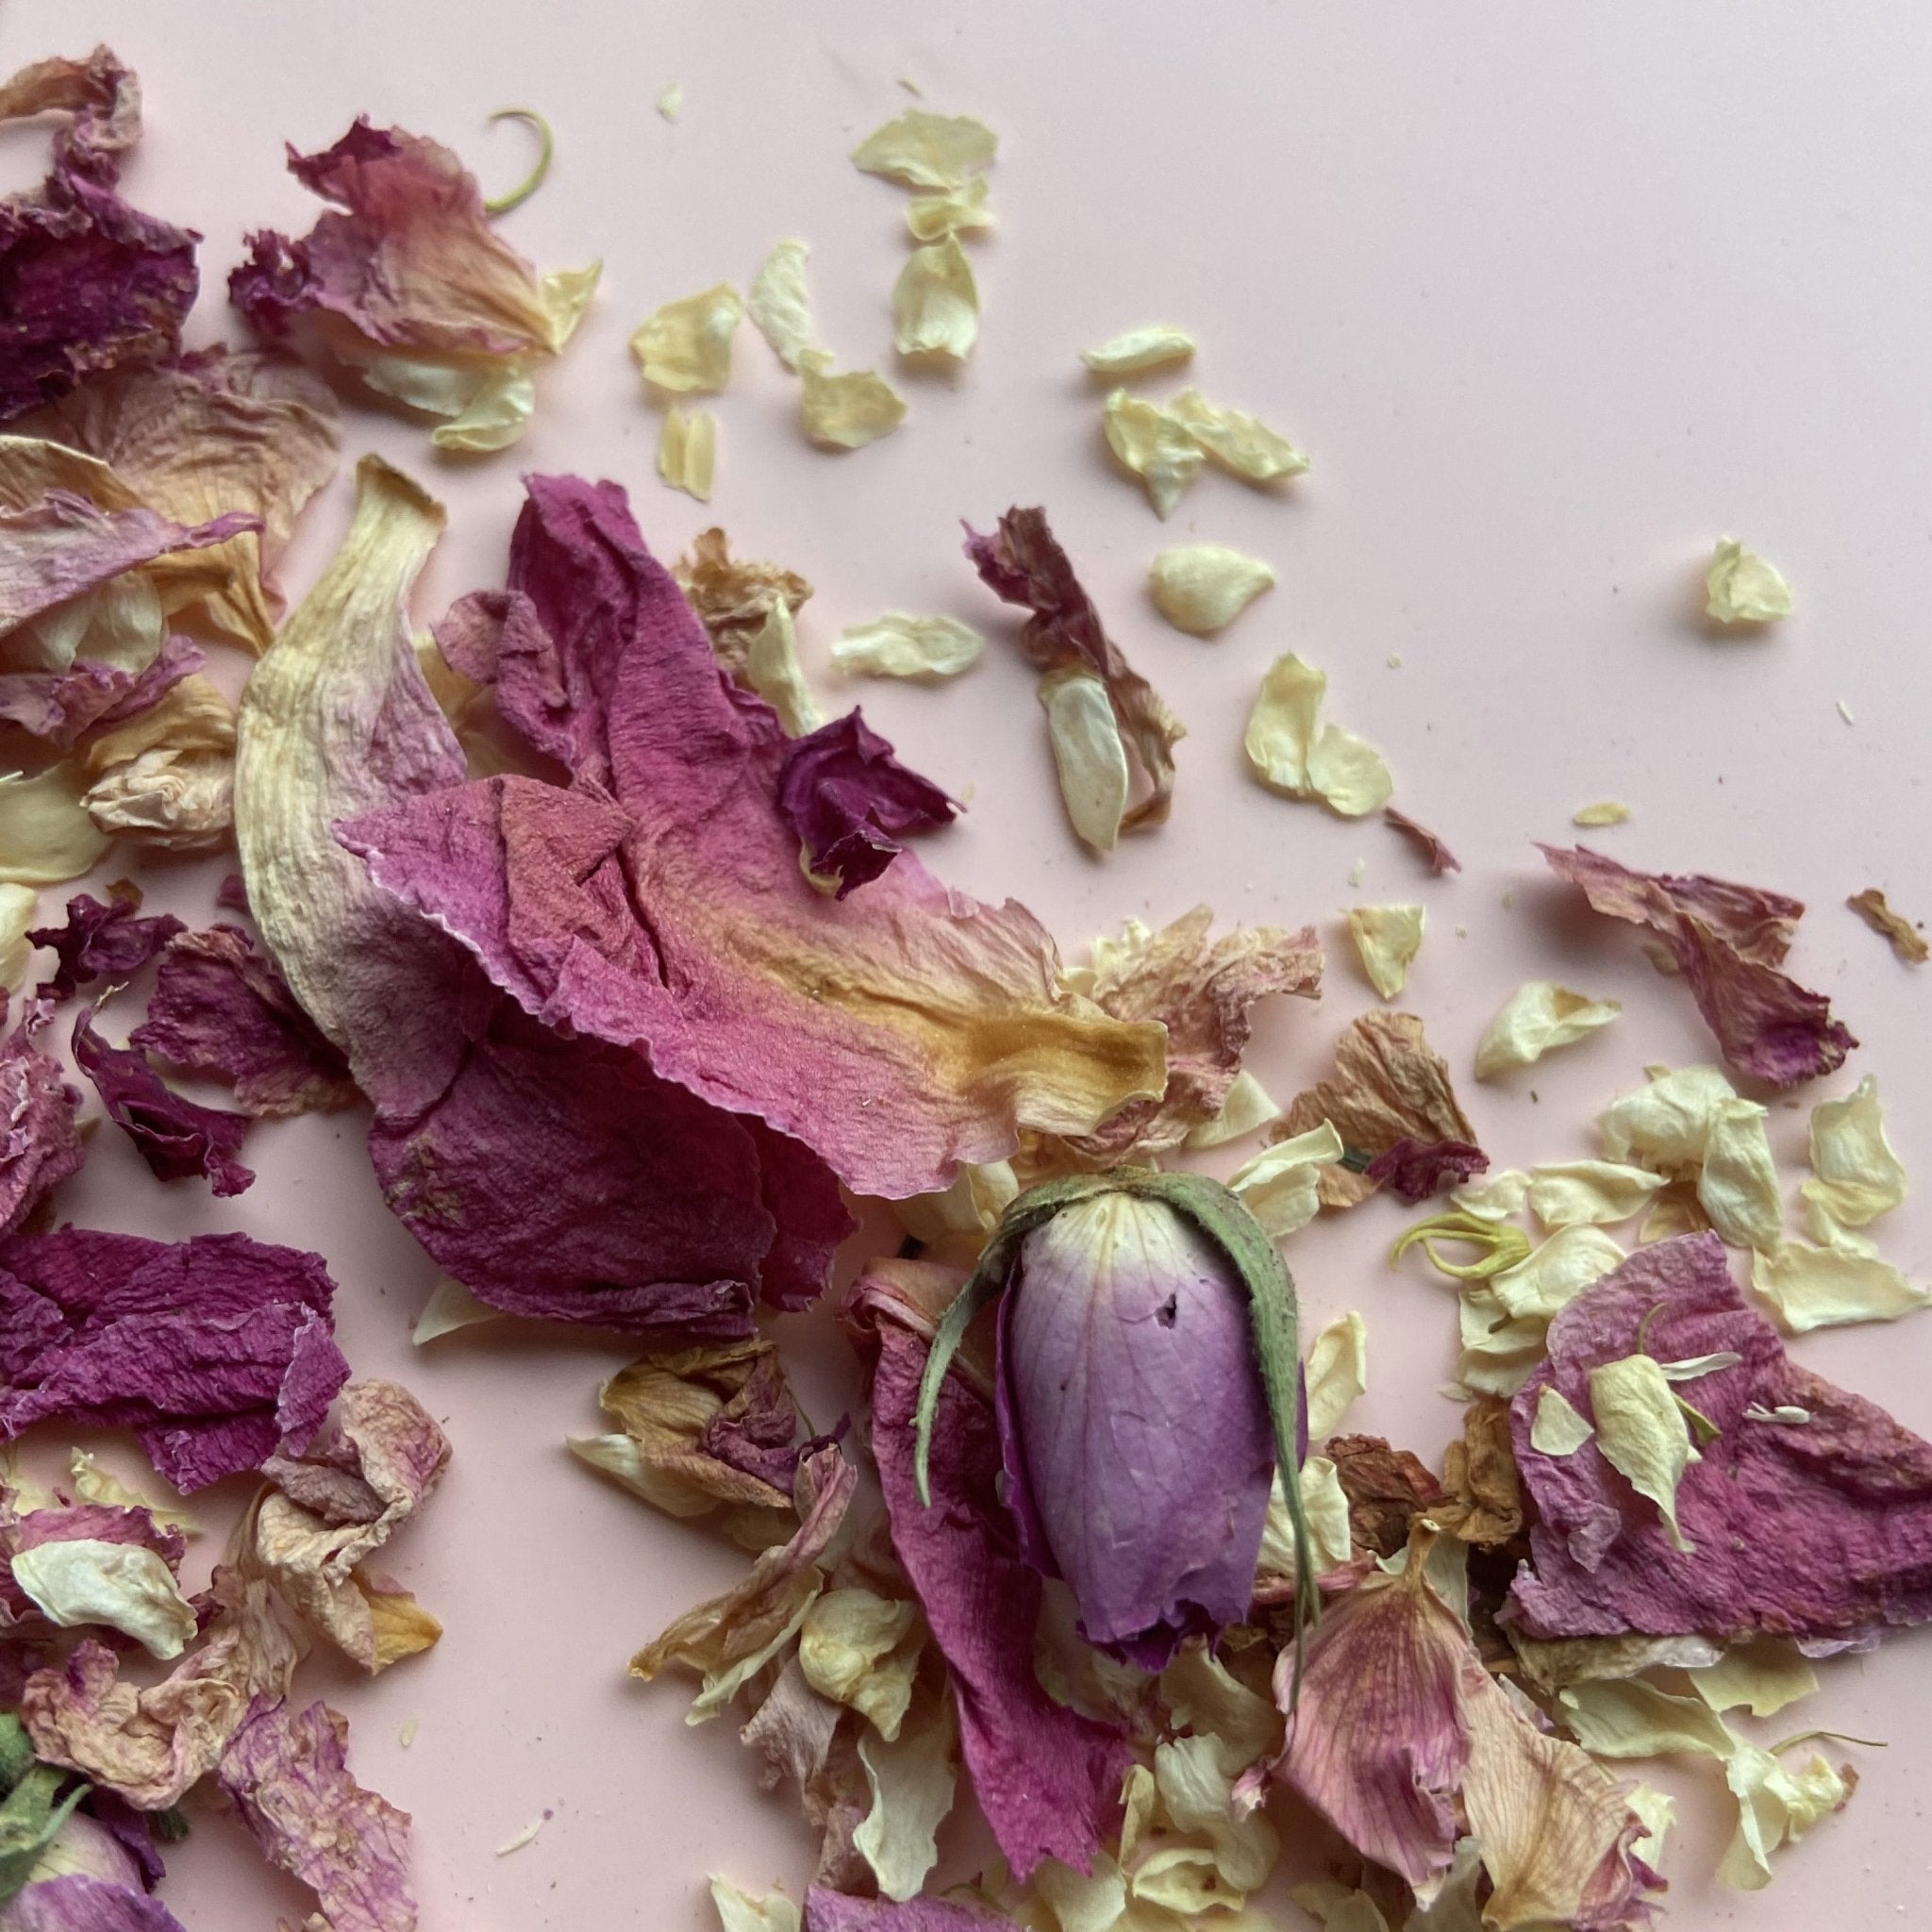 How to care for Dried Flowers and Biodegradable Confetti